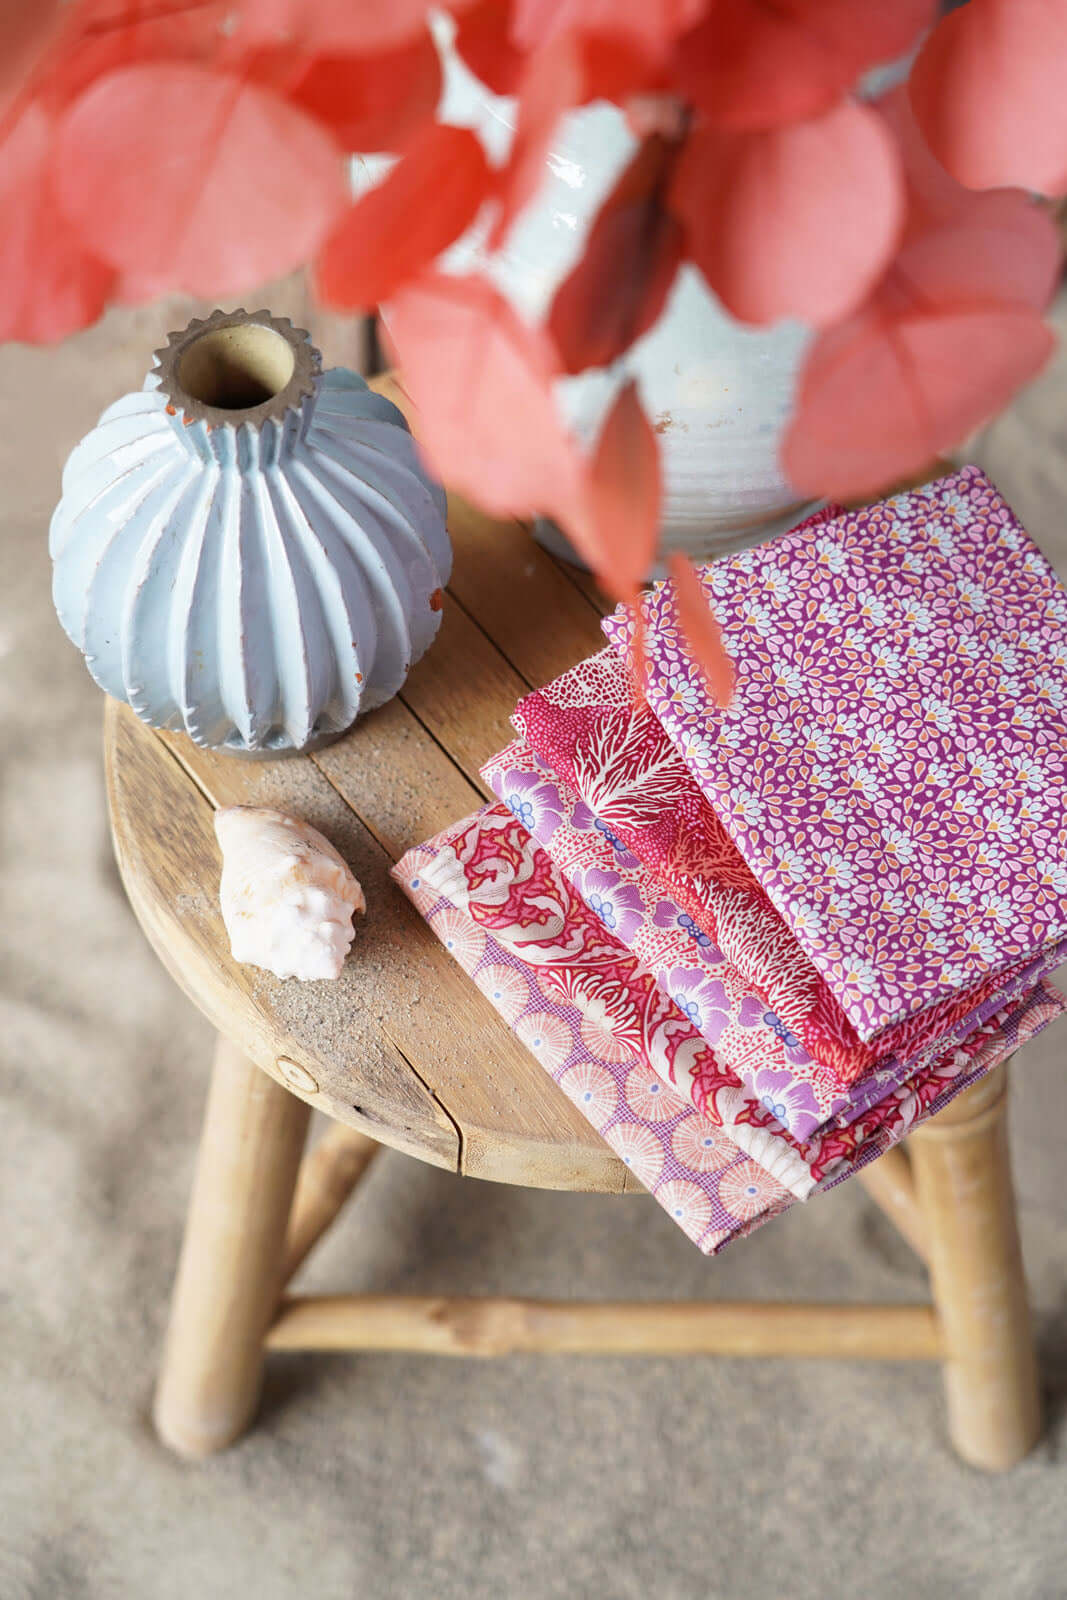 Cotton Beach Coral fabrics by the Fat quarter - cotton fabric by Tilda.